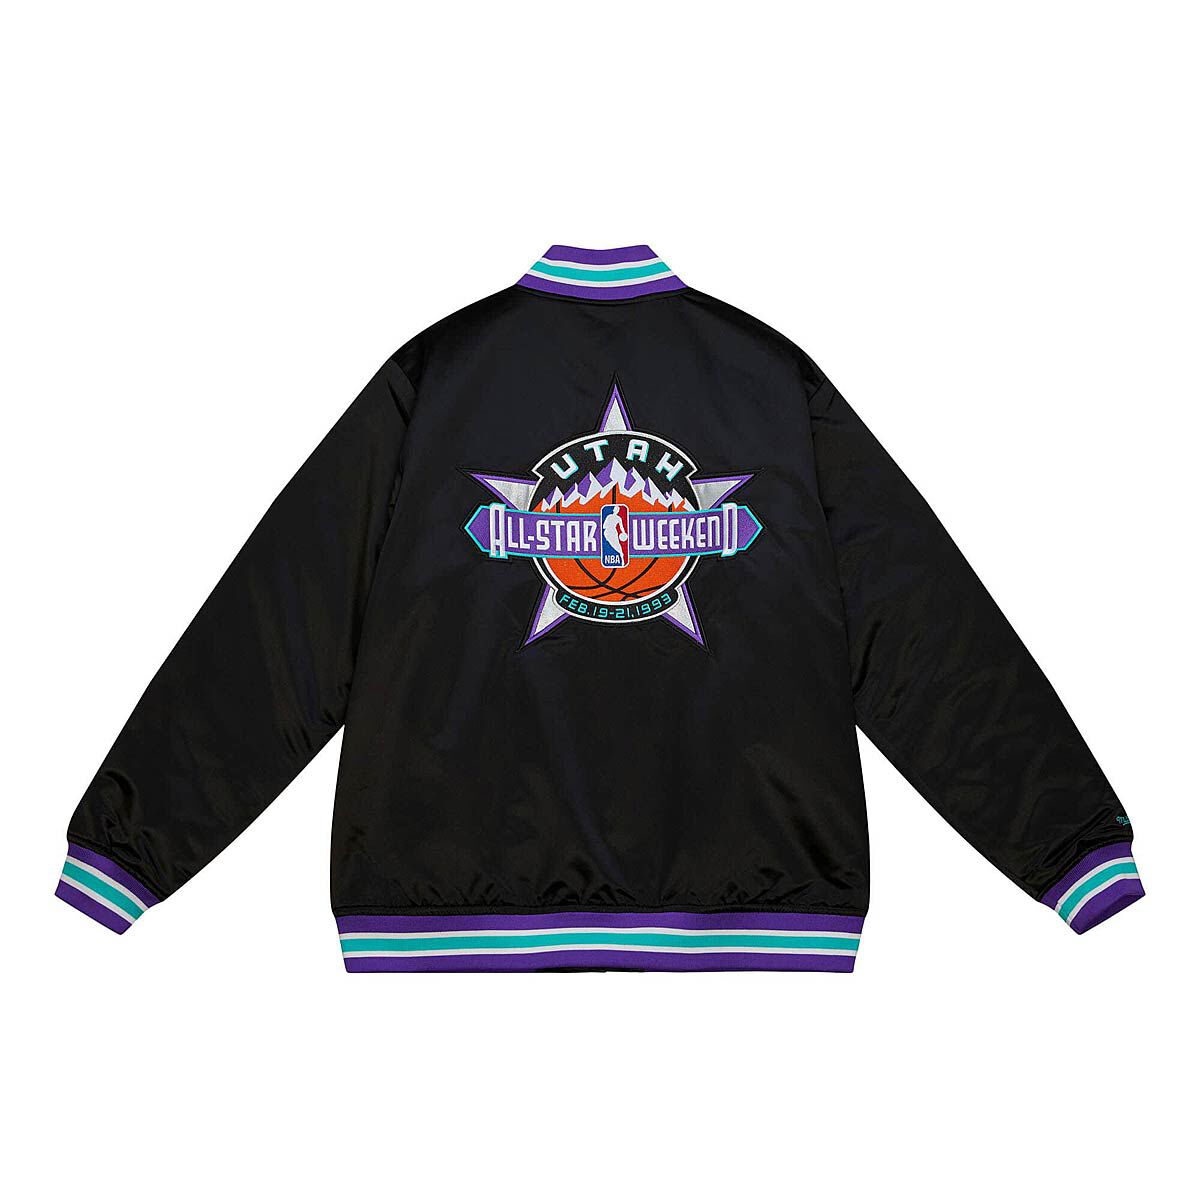 Buy Nba All Star Game 1993 Heavyweight Satin Jacket For Eur 7290 On